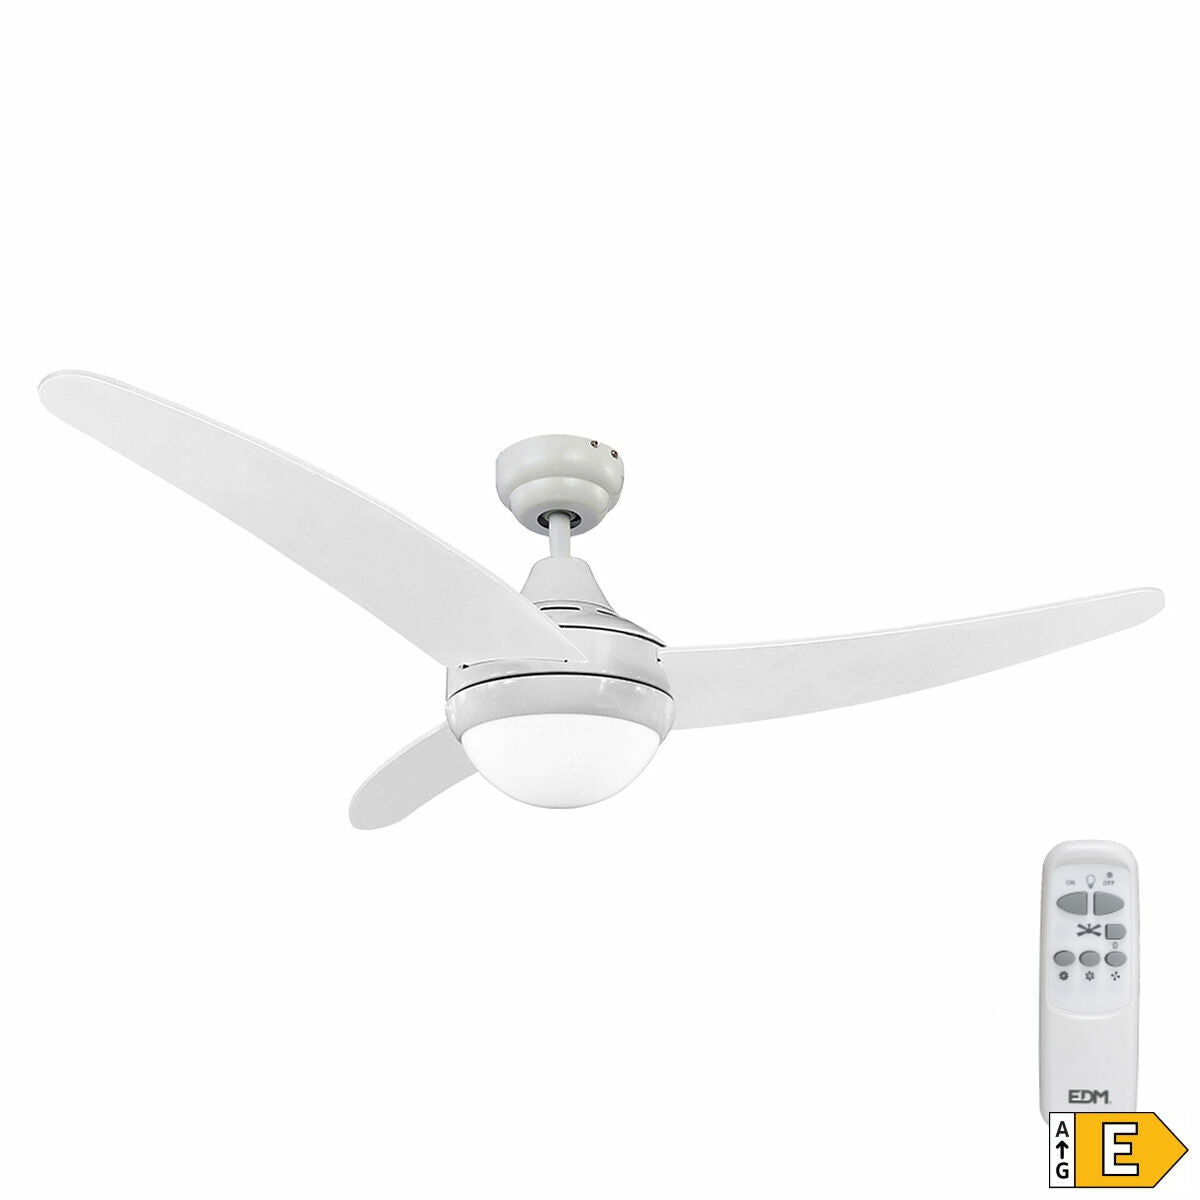 Ceiling Fan with Light EDM 33803 Egeo White 60 W, EDM, Lighting, Indoor lighting, ceiling-fan-with-light-edm-33803-egeo-white-60-w, Brand_EDM, category-reference-2399, category-reference-2450, category-reference-2451, category-reference-t-10333, category-reference-t-10347, category-reference-t-19657, Condition_NEW, led / lighting, Price_100 - 200, small electric appliances, summer, RiotNook